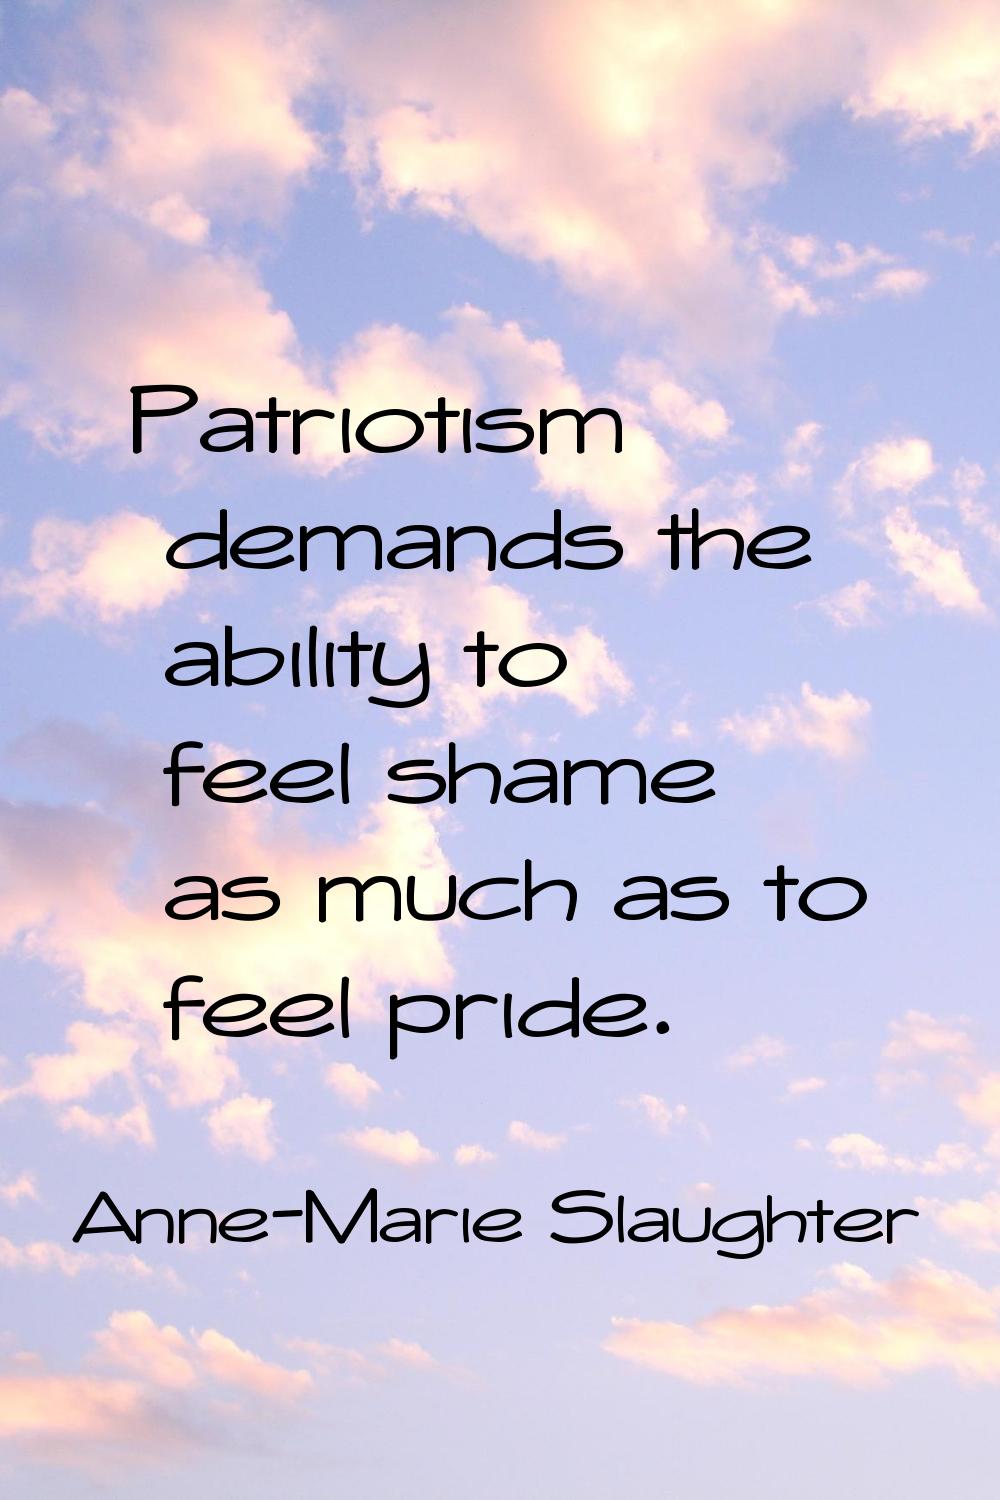 Patriotism demands the ability to feel shame as much as to feel pride.